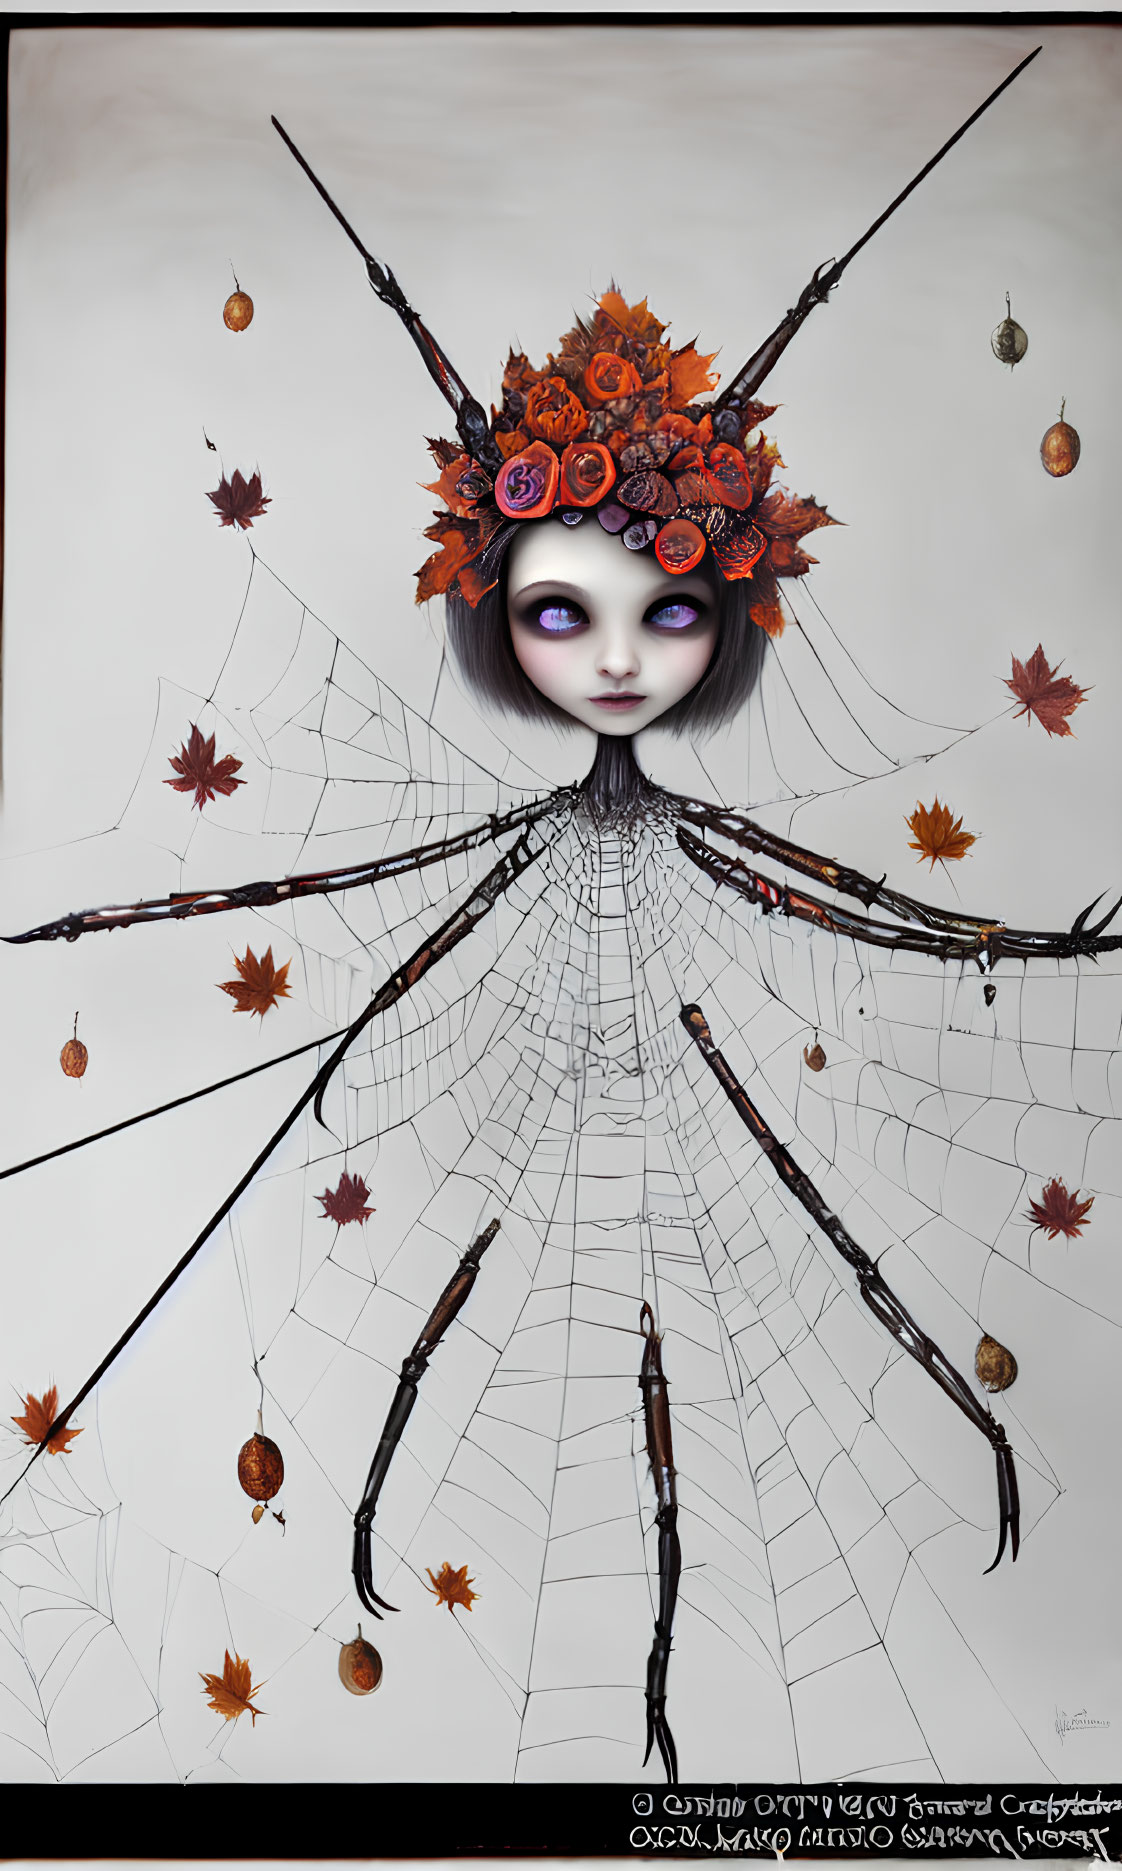 Fantastical painting featuring figure with purple eyes and autumn crown